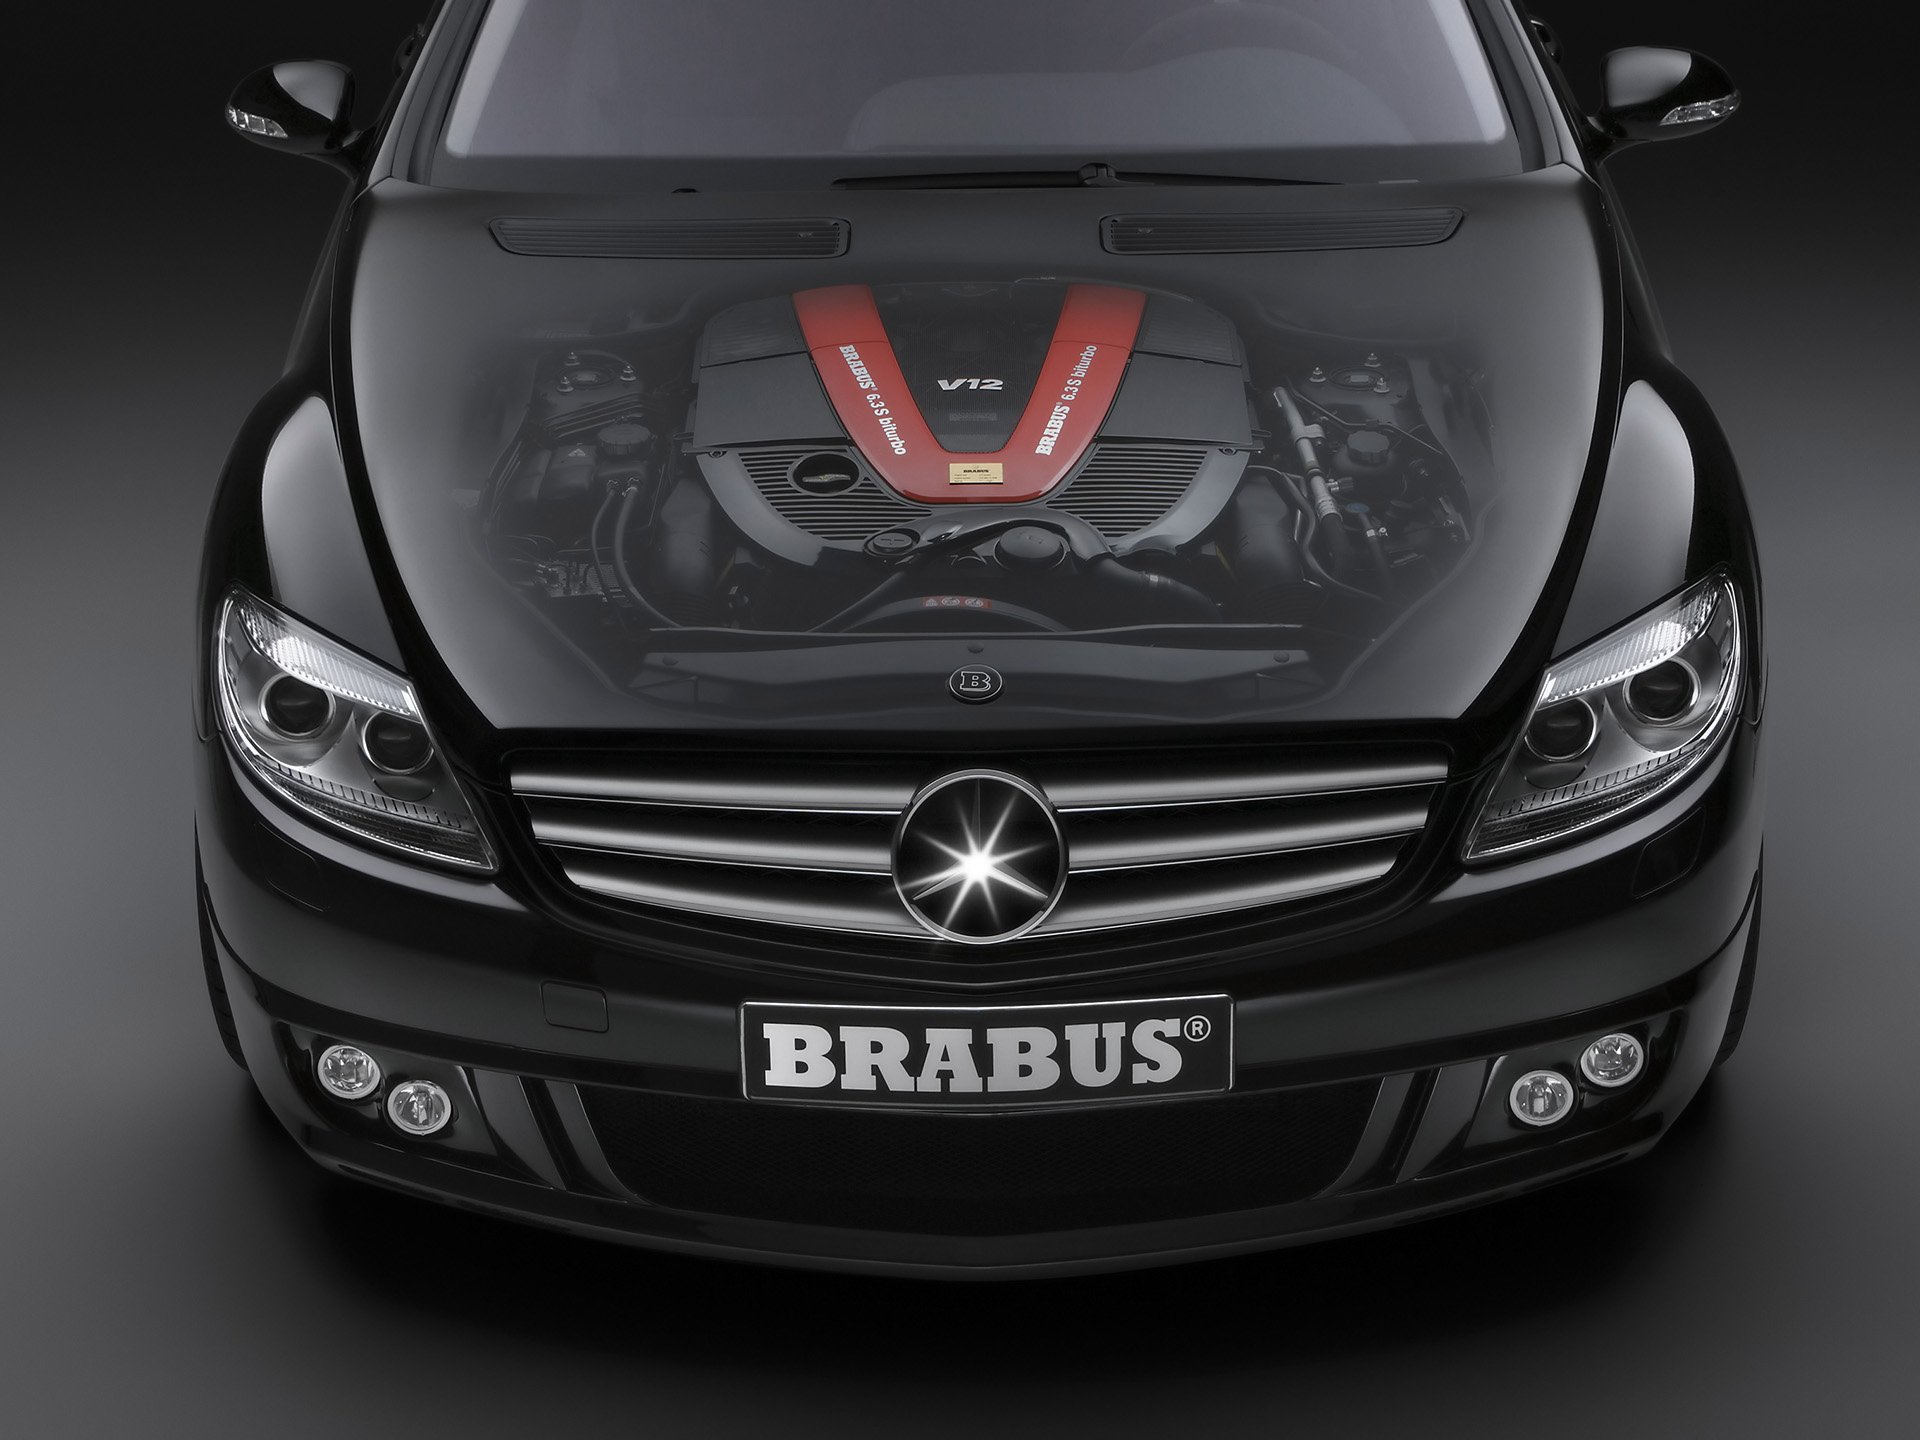 brabus sv12 s biturbo coupe based on mercedes benz cl 600 engine ghosted, 1920x1440 Wallpaper